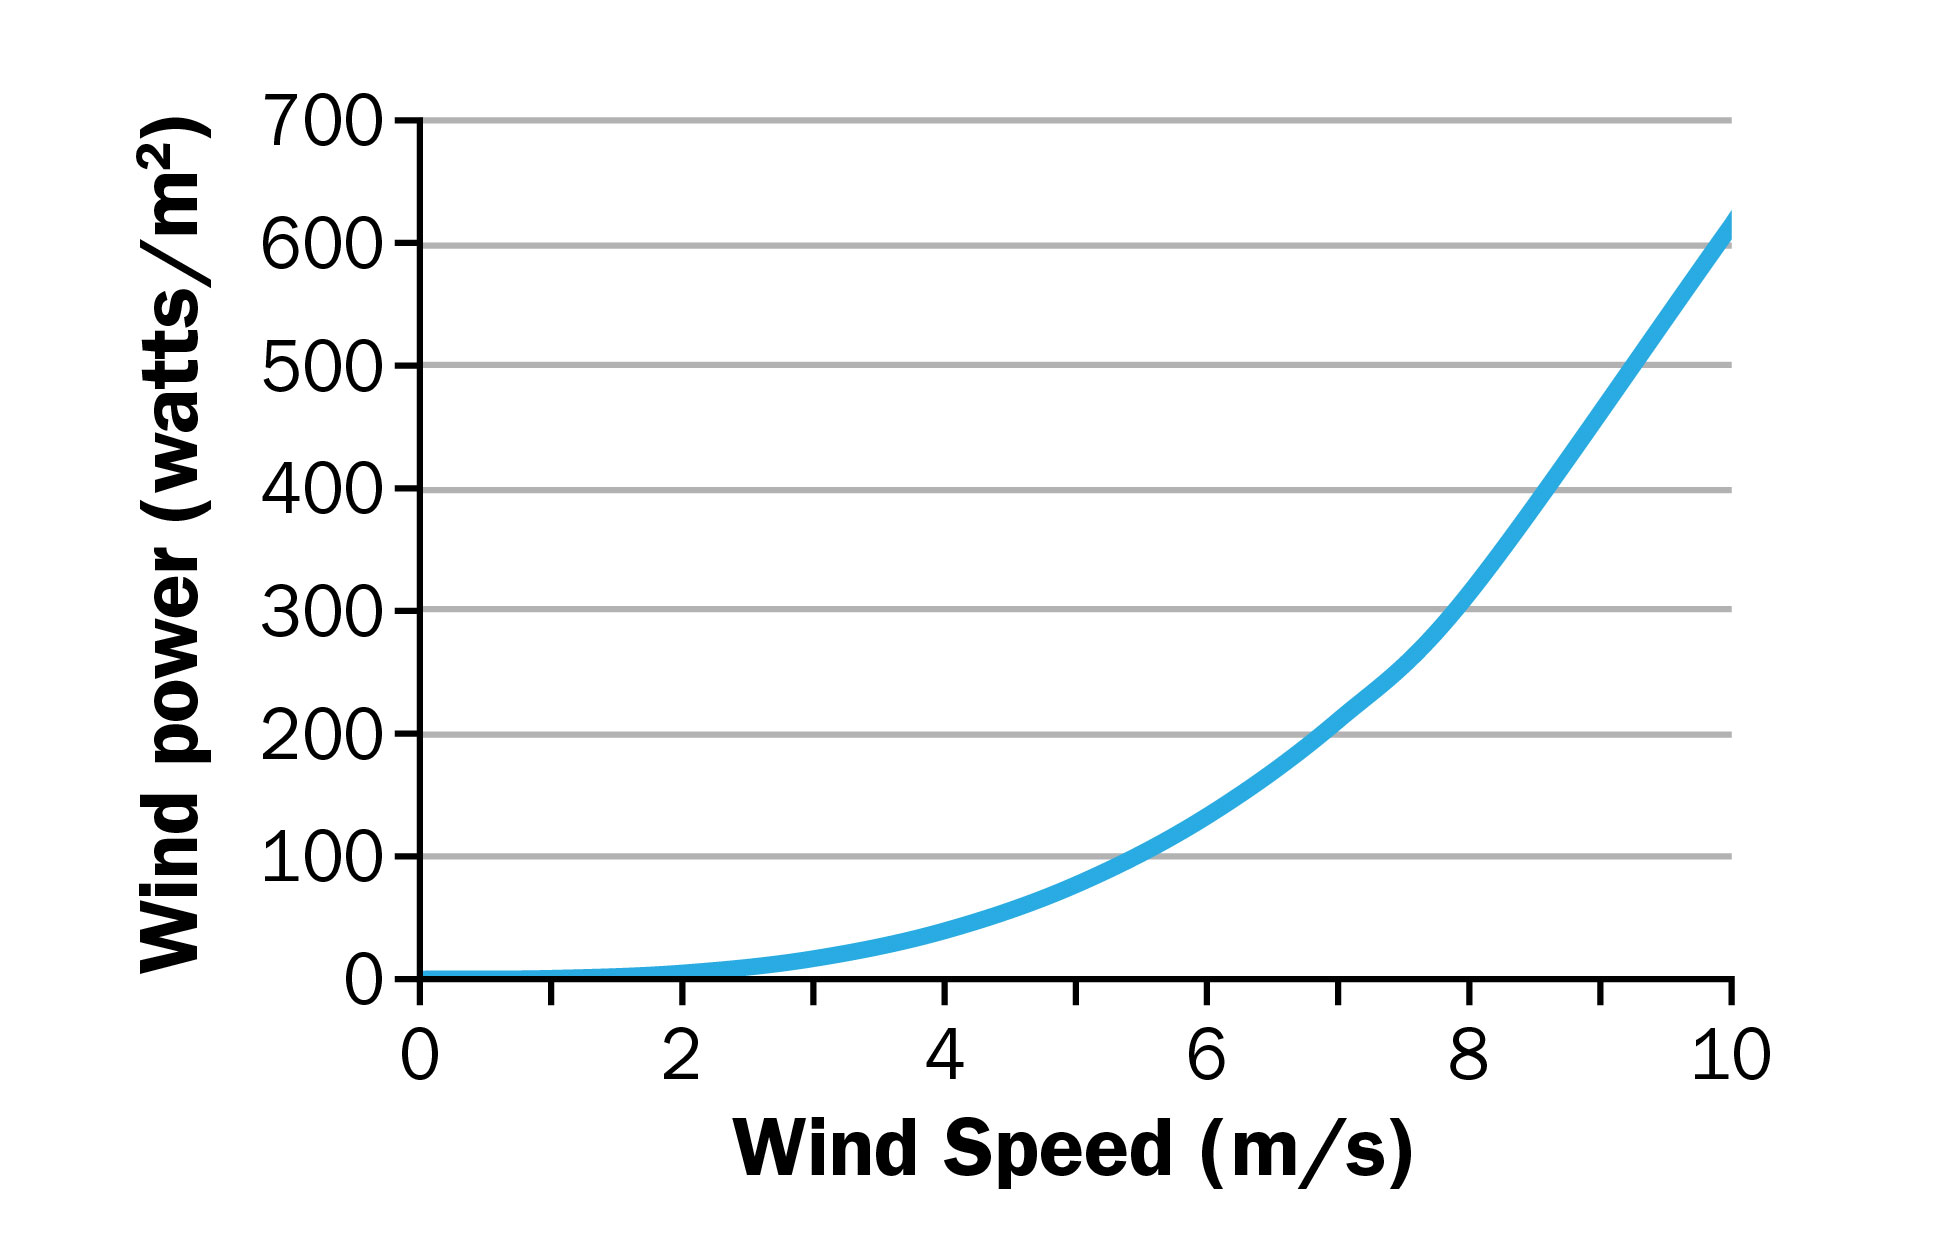 Power curve showing the relationship between wind speed and power output